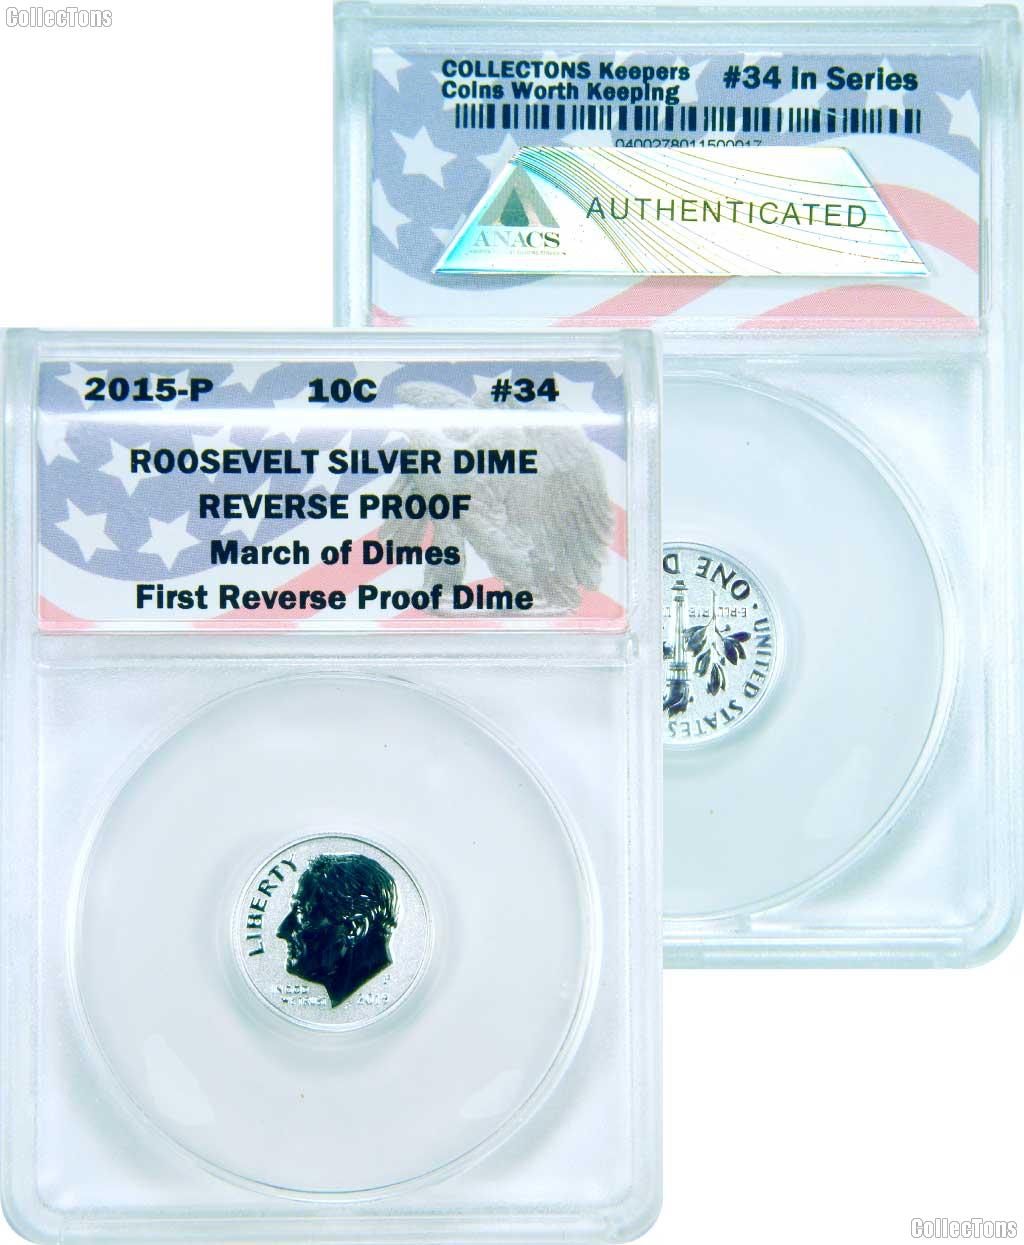 CollecTons Keepers #34: 2015-P Silver Reverse Proof Roosevelt Dime Certified in Exclusive ANACS Holder